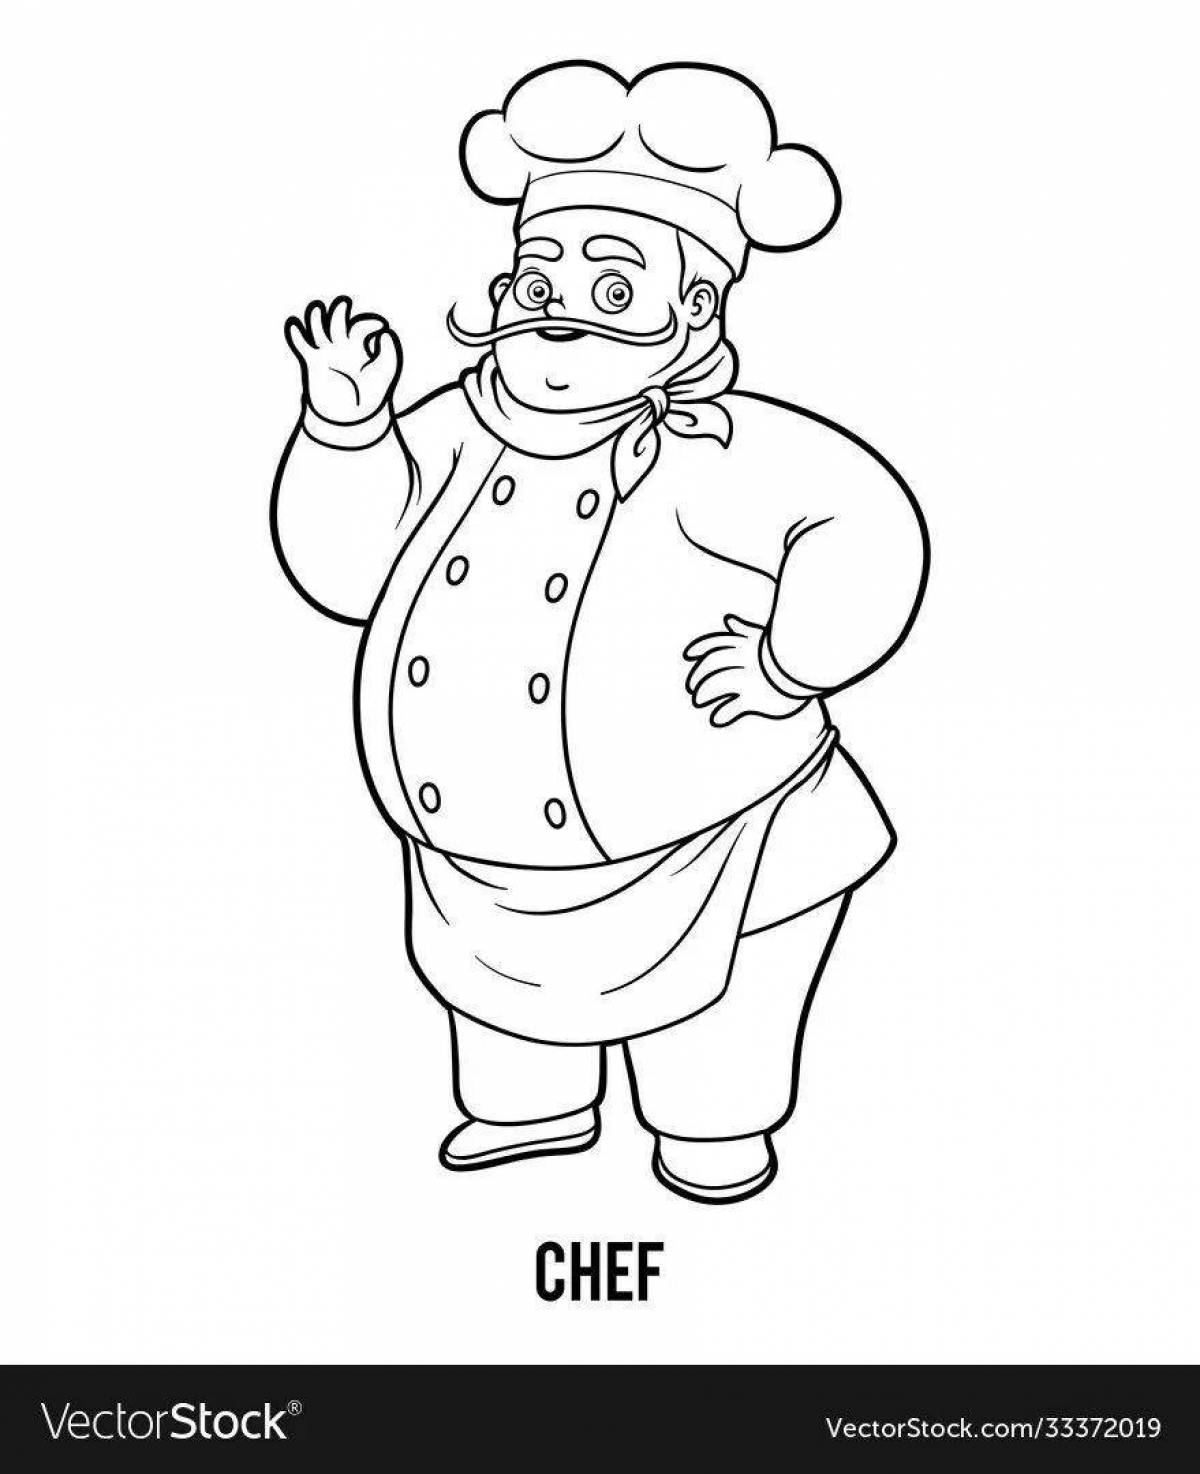 Funny chef coloring page